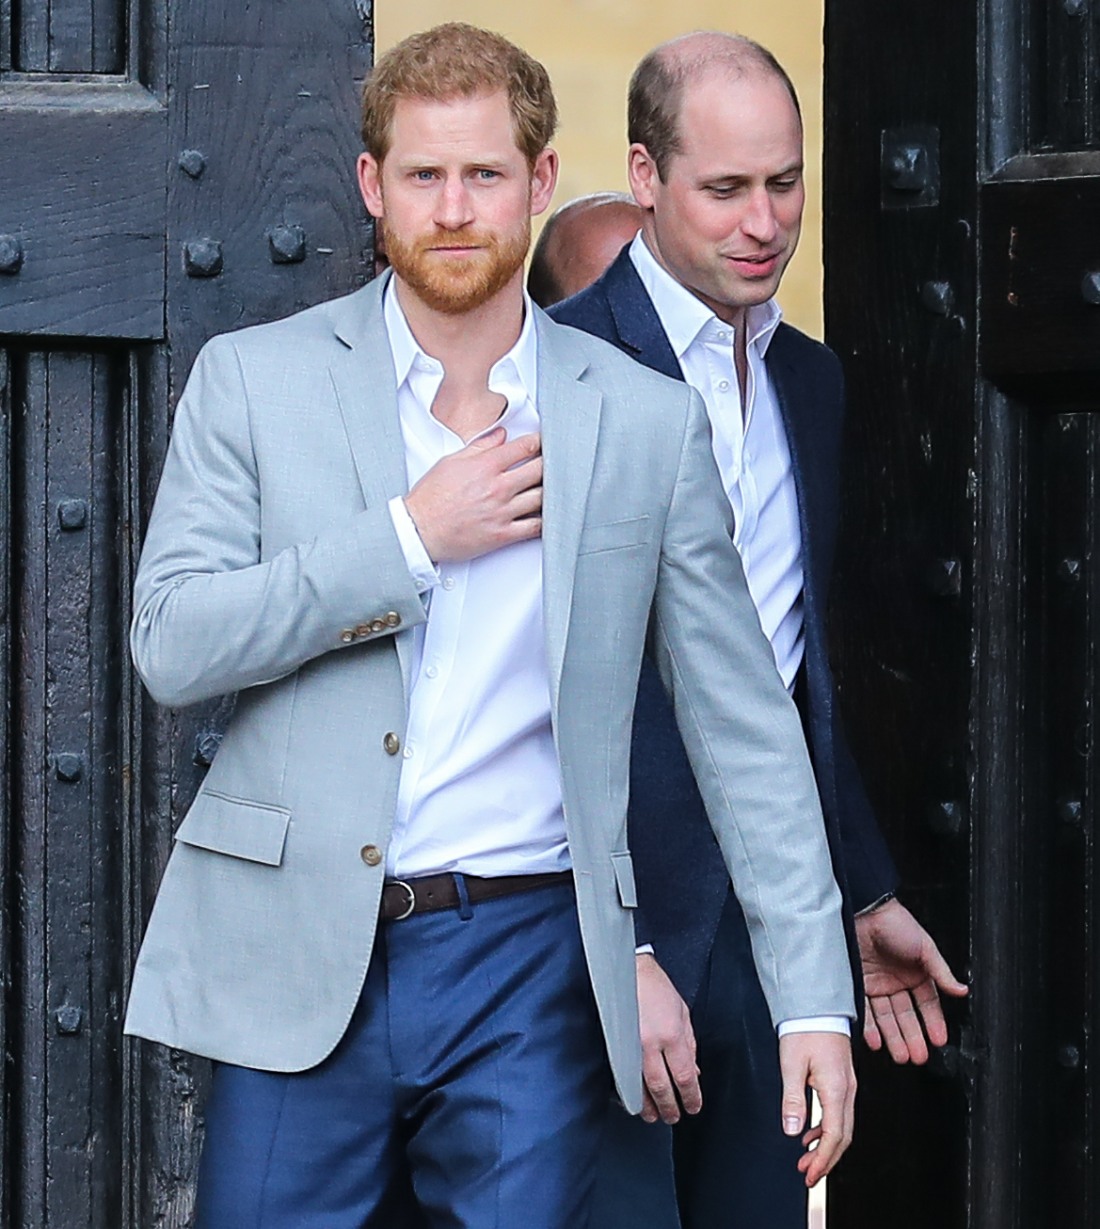 Prince Harry greets the crowds outside Windsor Castle on the evening before his wedding to Meghan Markle